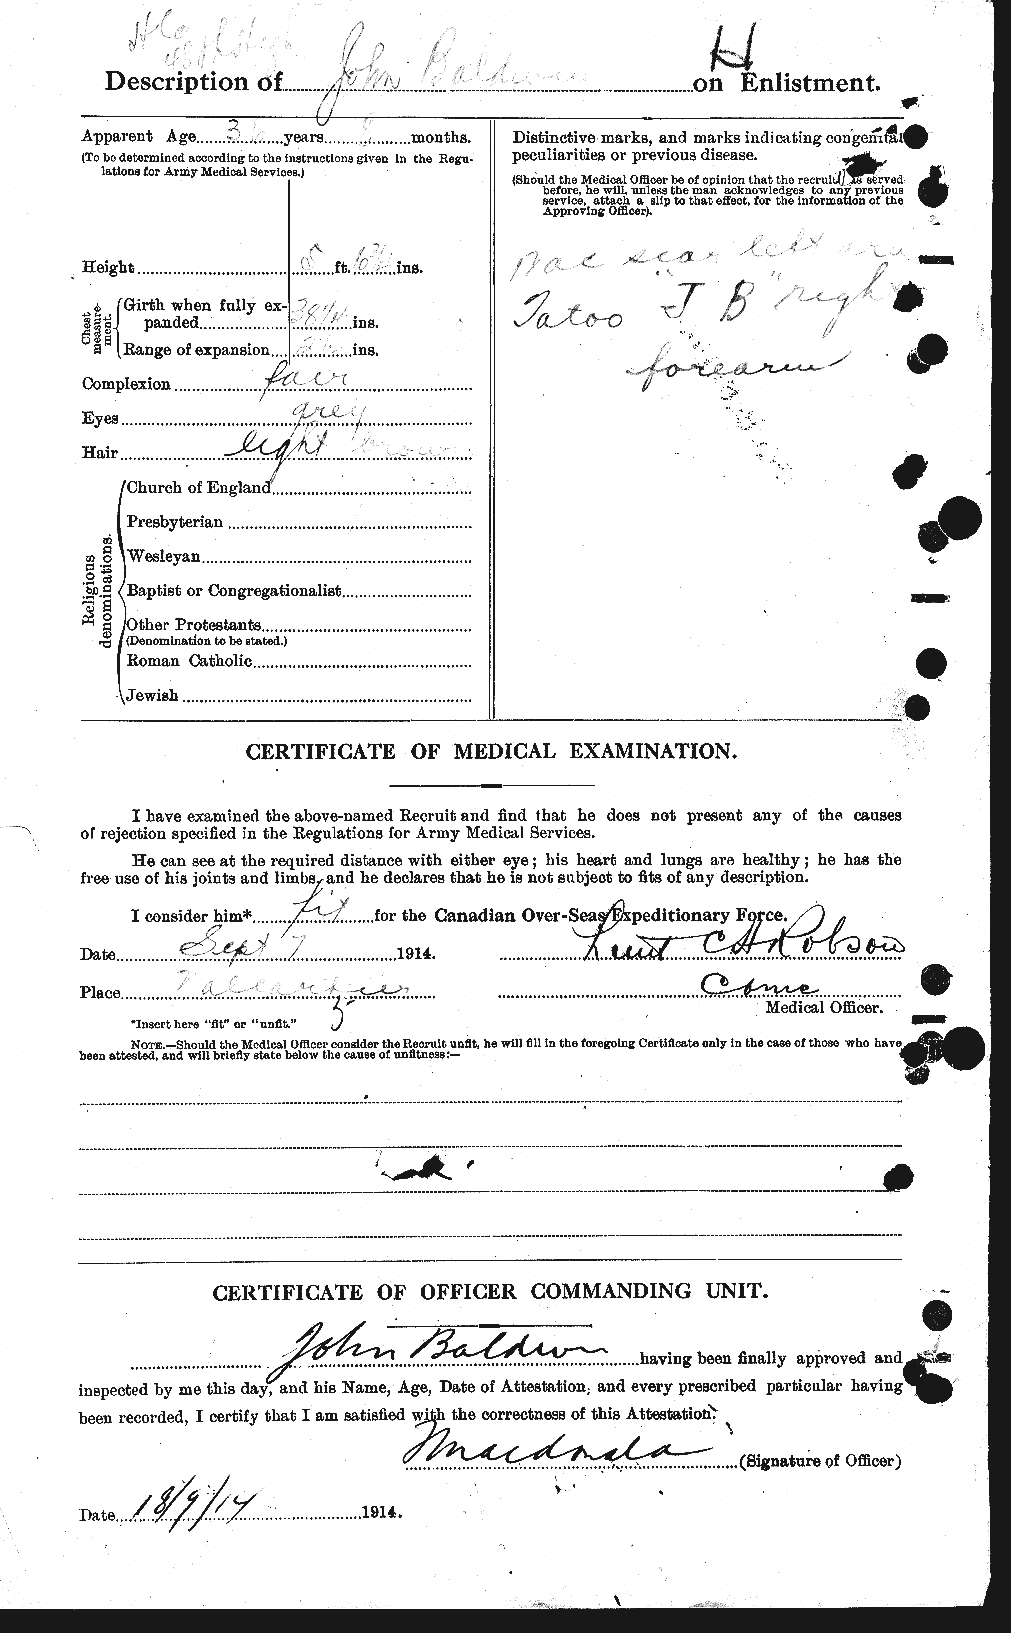 Personnel Records of the First World War - CEF 225218b